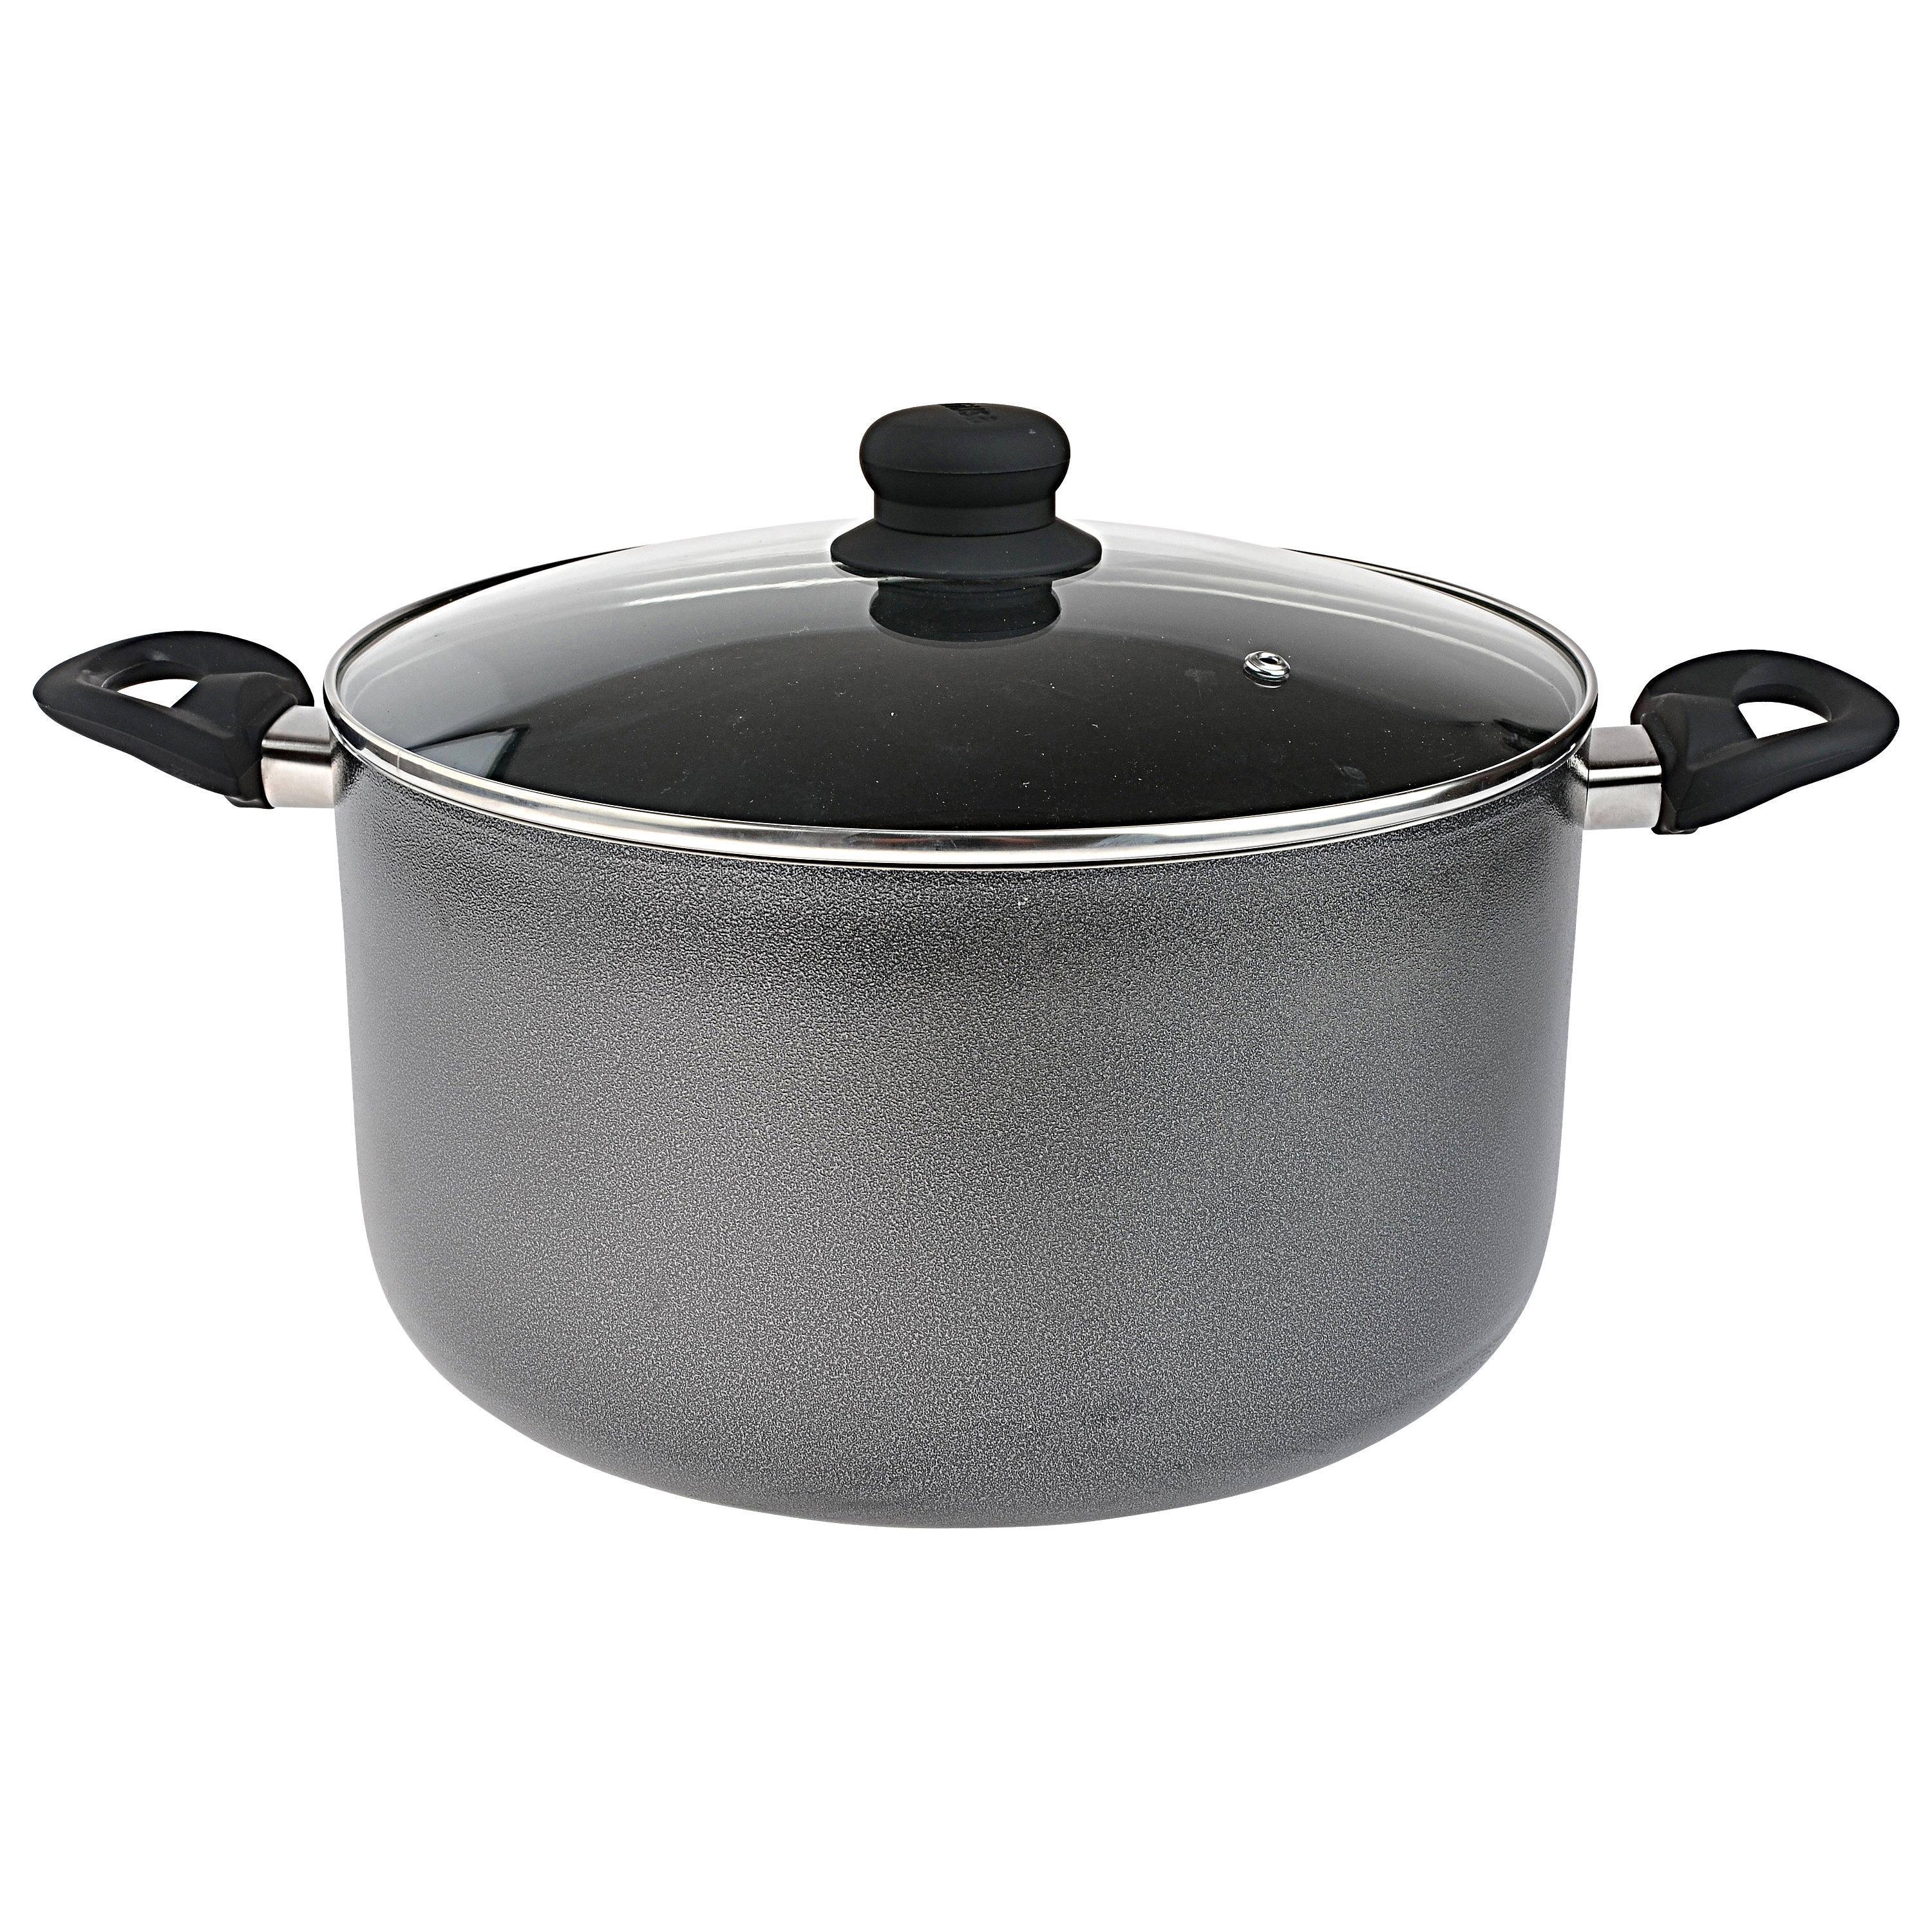 IMUSA IMUSA PTFE Nonstick Dutch Oven with Glass Lid 10 Quart, Charcoal -  IMUSA